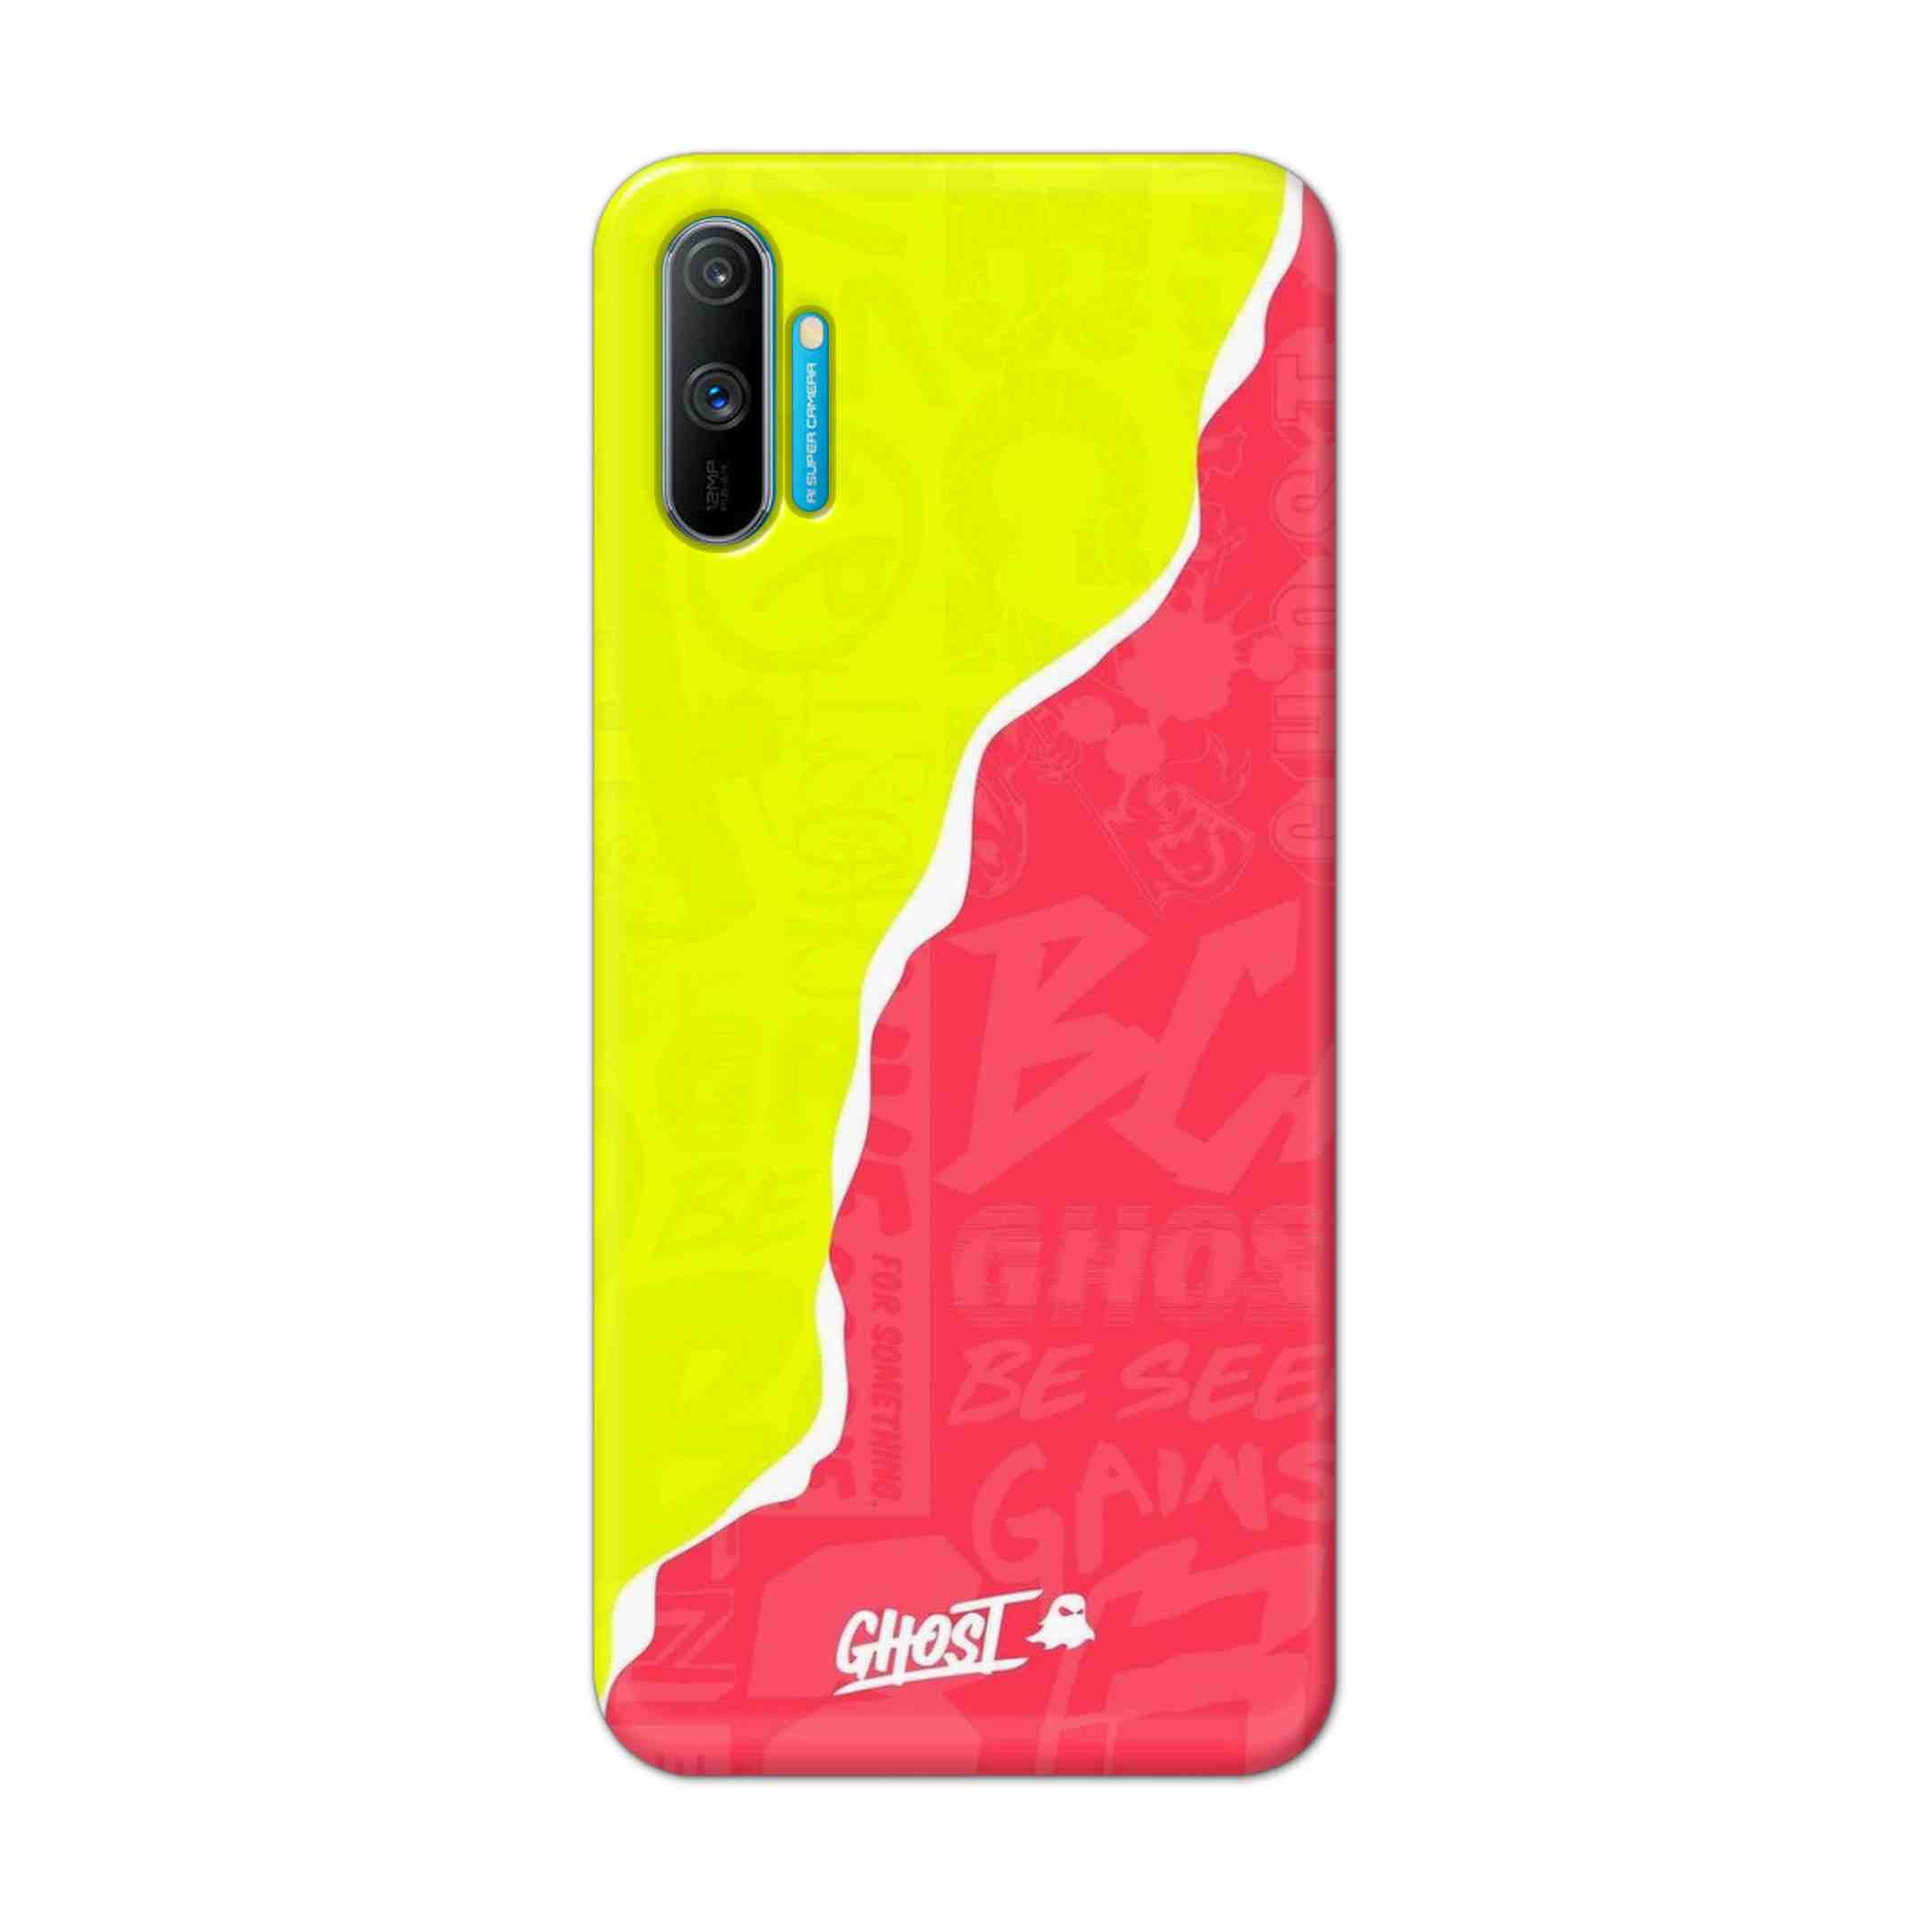 Buy Ghost Hard Back Mobile Phone Case Cover For Realme C3 Online